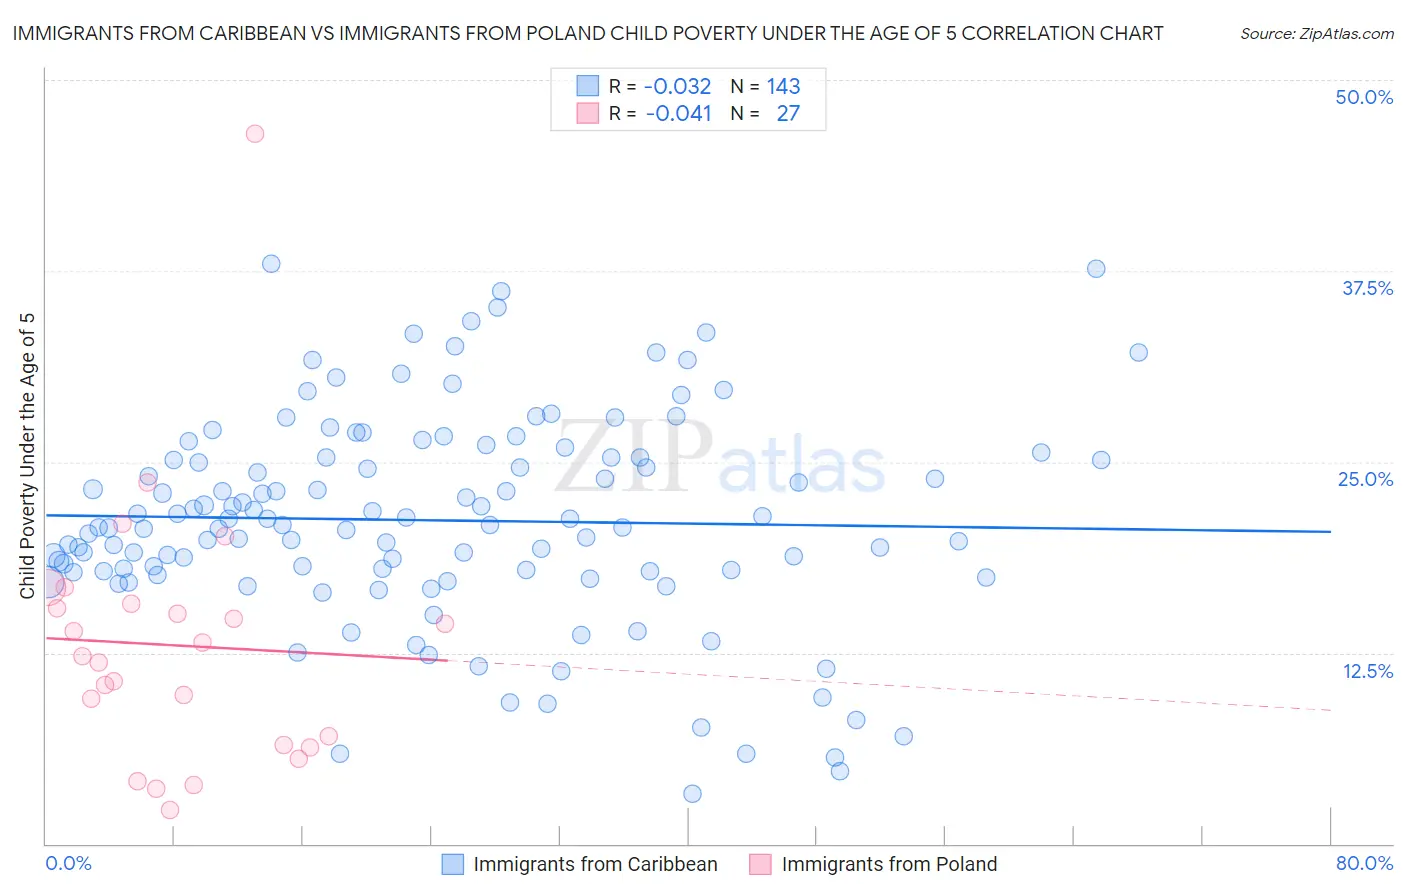 Immigrants from Caribbean vs Immigrants from Poland Child Poverty Under the Age of 5